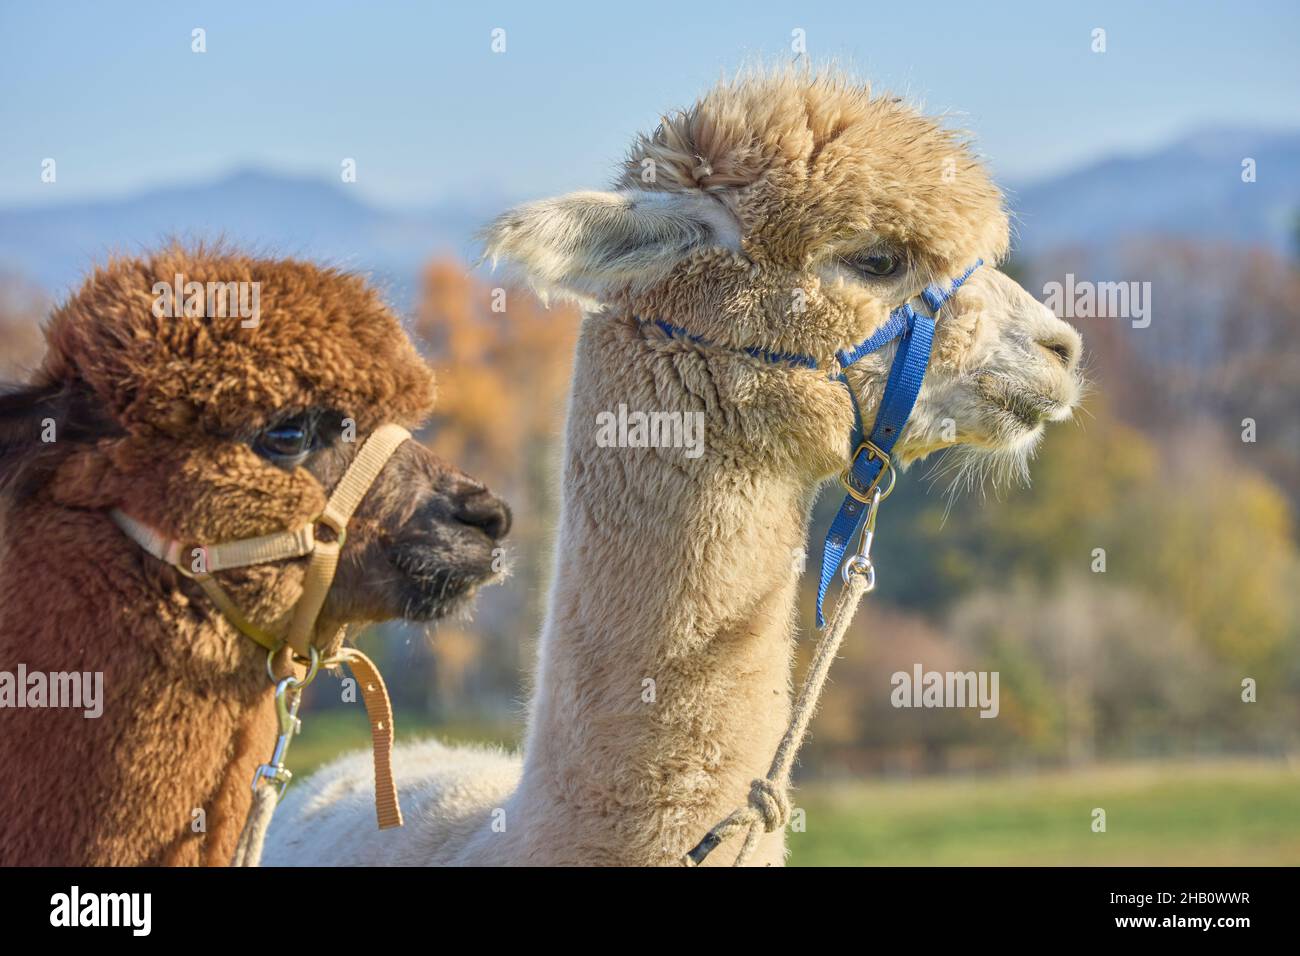 2 Two Fluffy Alpacas, Beige And Brown, Look Attentively In The Same Direction. Blurred Background With Trees Hills And Blue Sky. Bauma Zurich Oberland Stock Photo